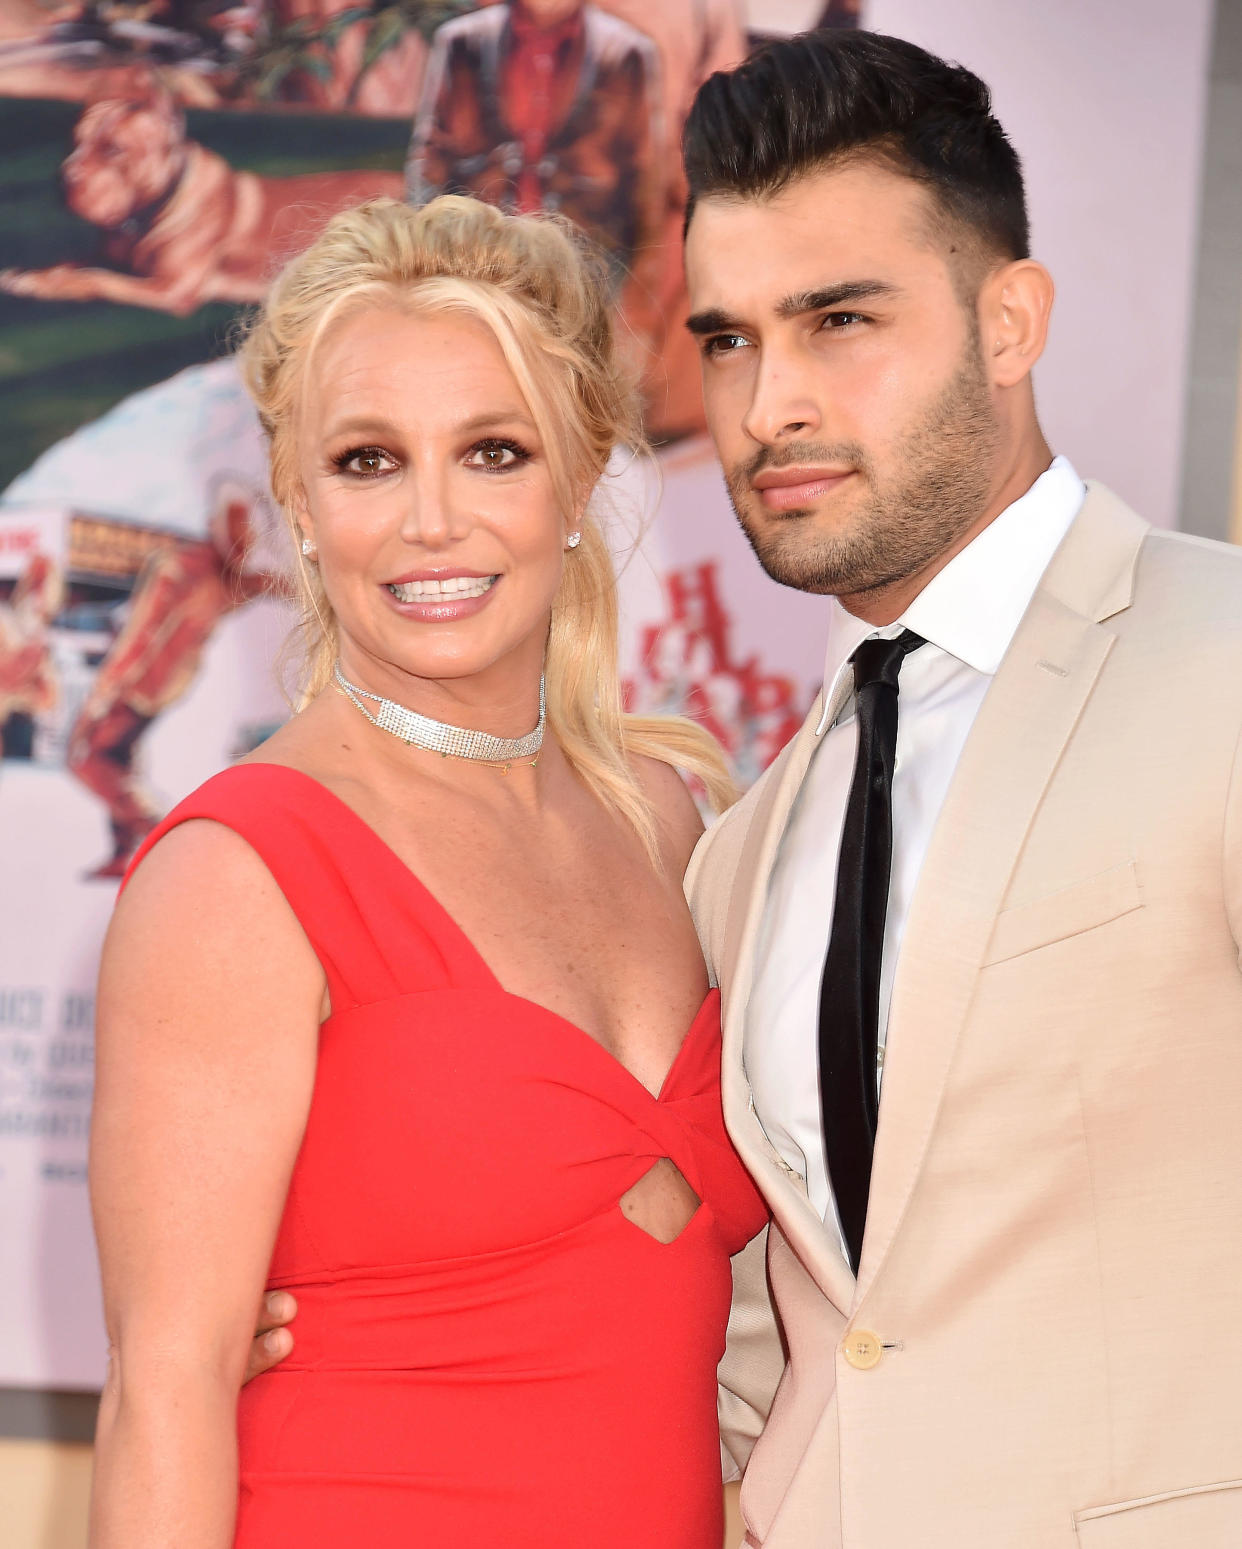 HOLLYWOOD, CA - JULY 22: Britney Spears (L) and Sam Asghari attend the Sony Pictures' "Once Upon A Time...In Hollywood" Los Angeles Premiere at the TCL Chinese Theatre on July 22, 2019 in Hollywood, California.